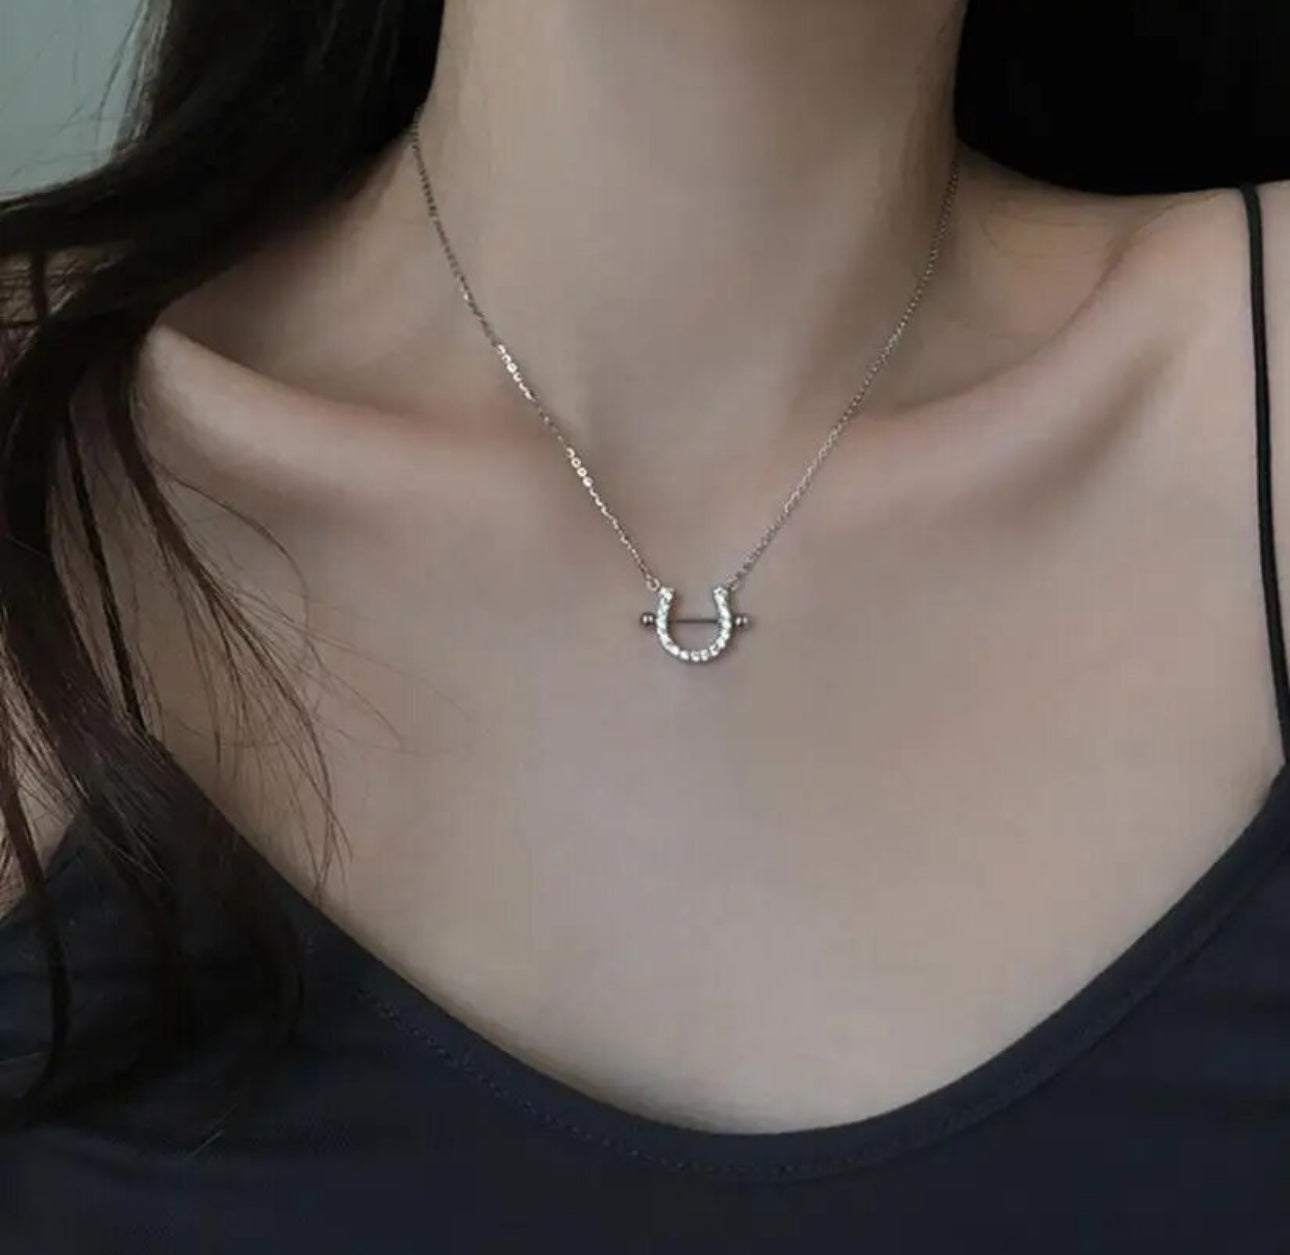 Good Luck Necklace